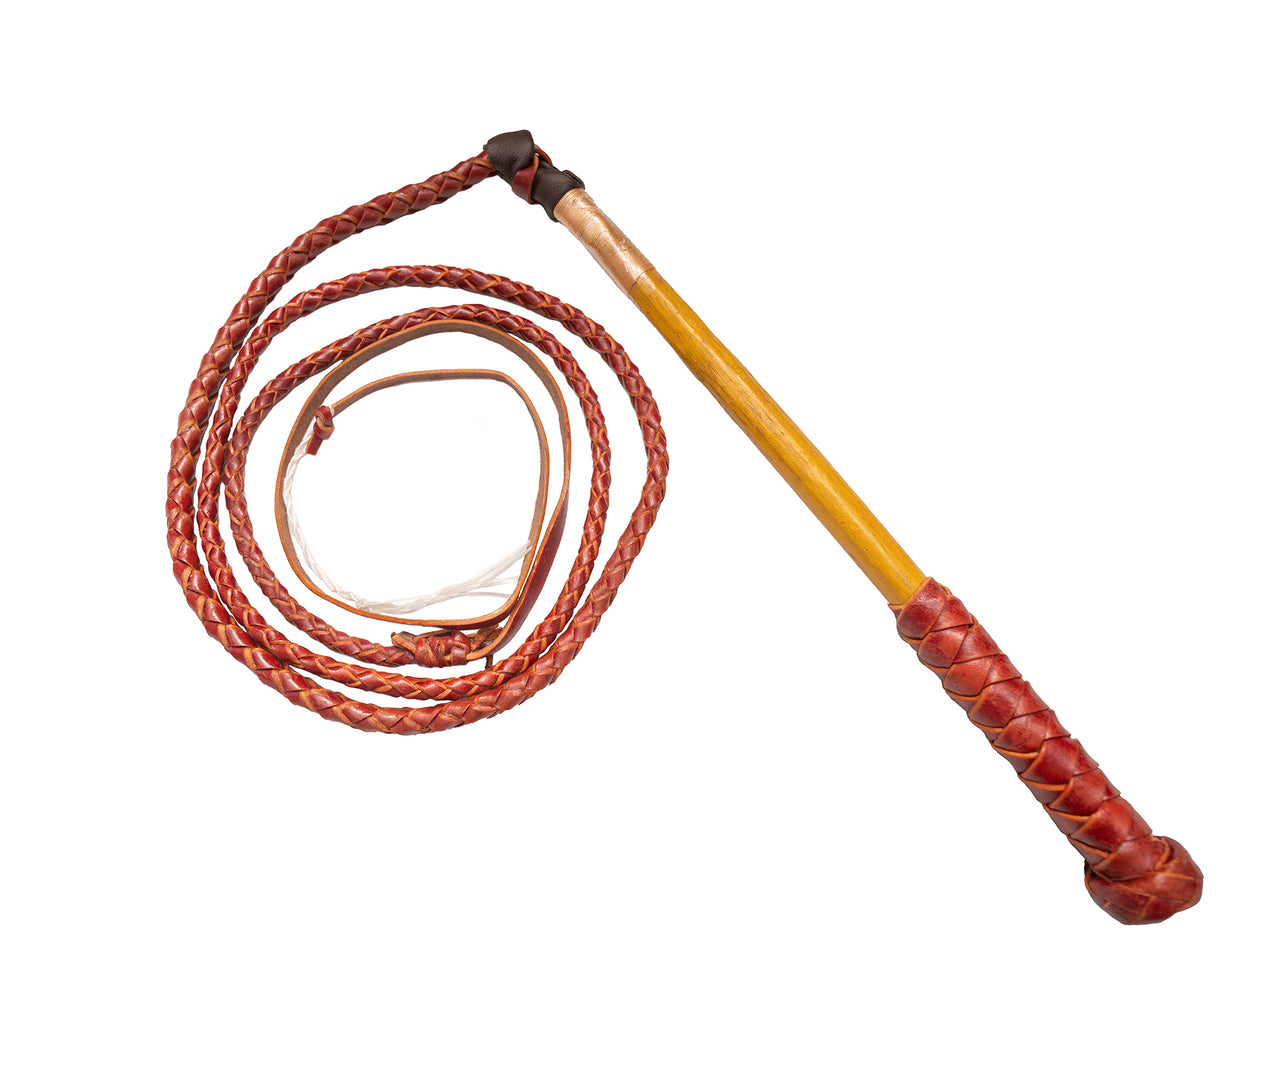 Stockmaster Redhide Stock Whip 6' x 4 Plait - The Trading Stables